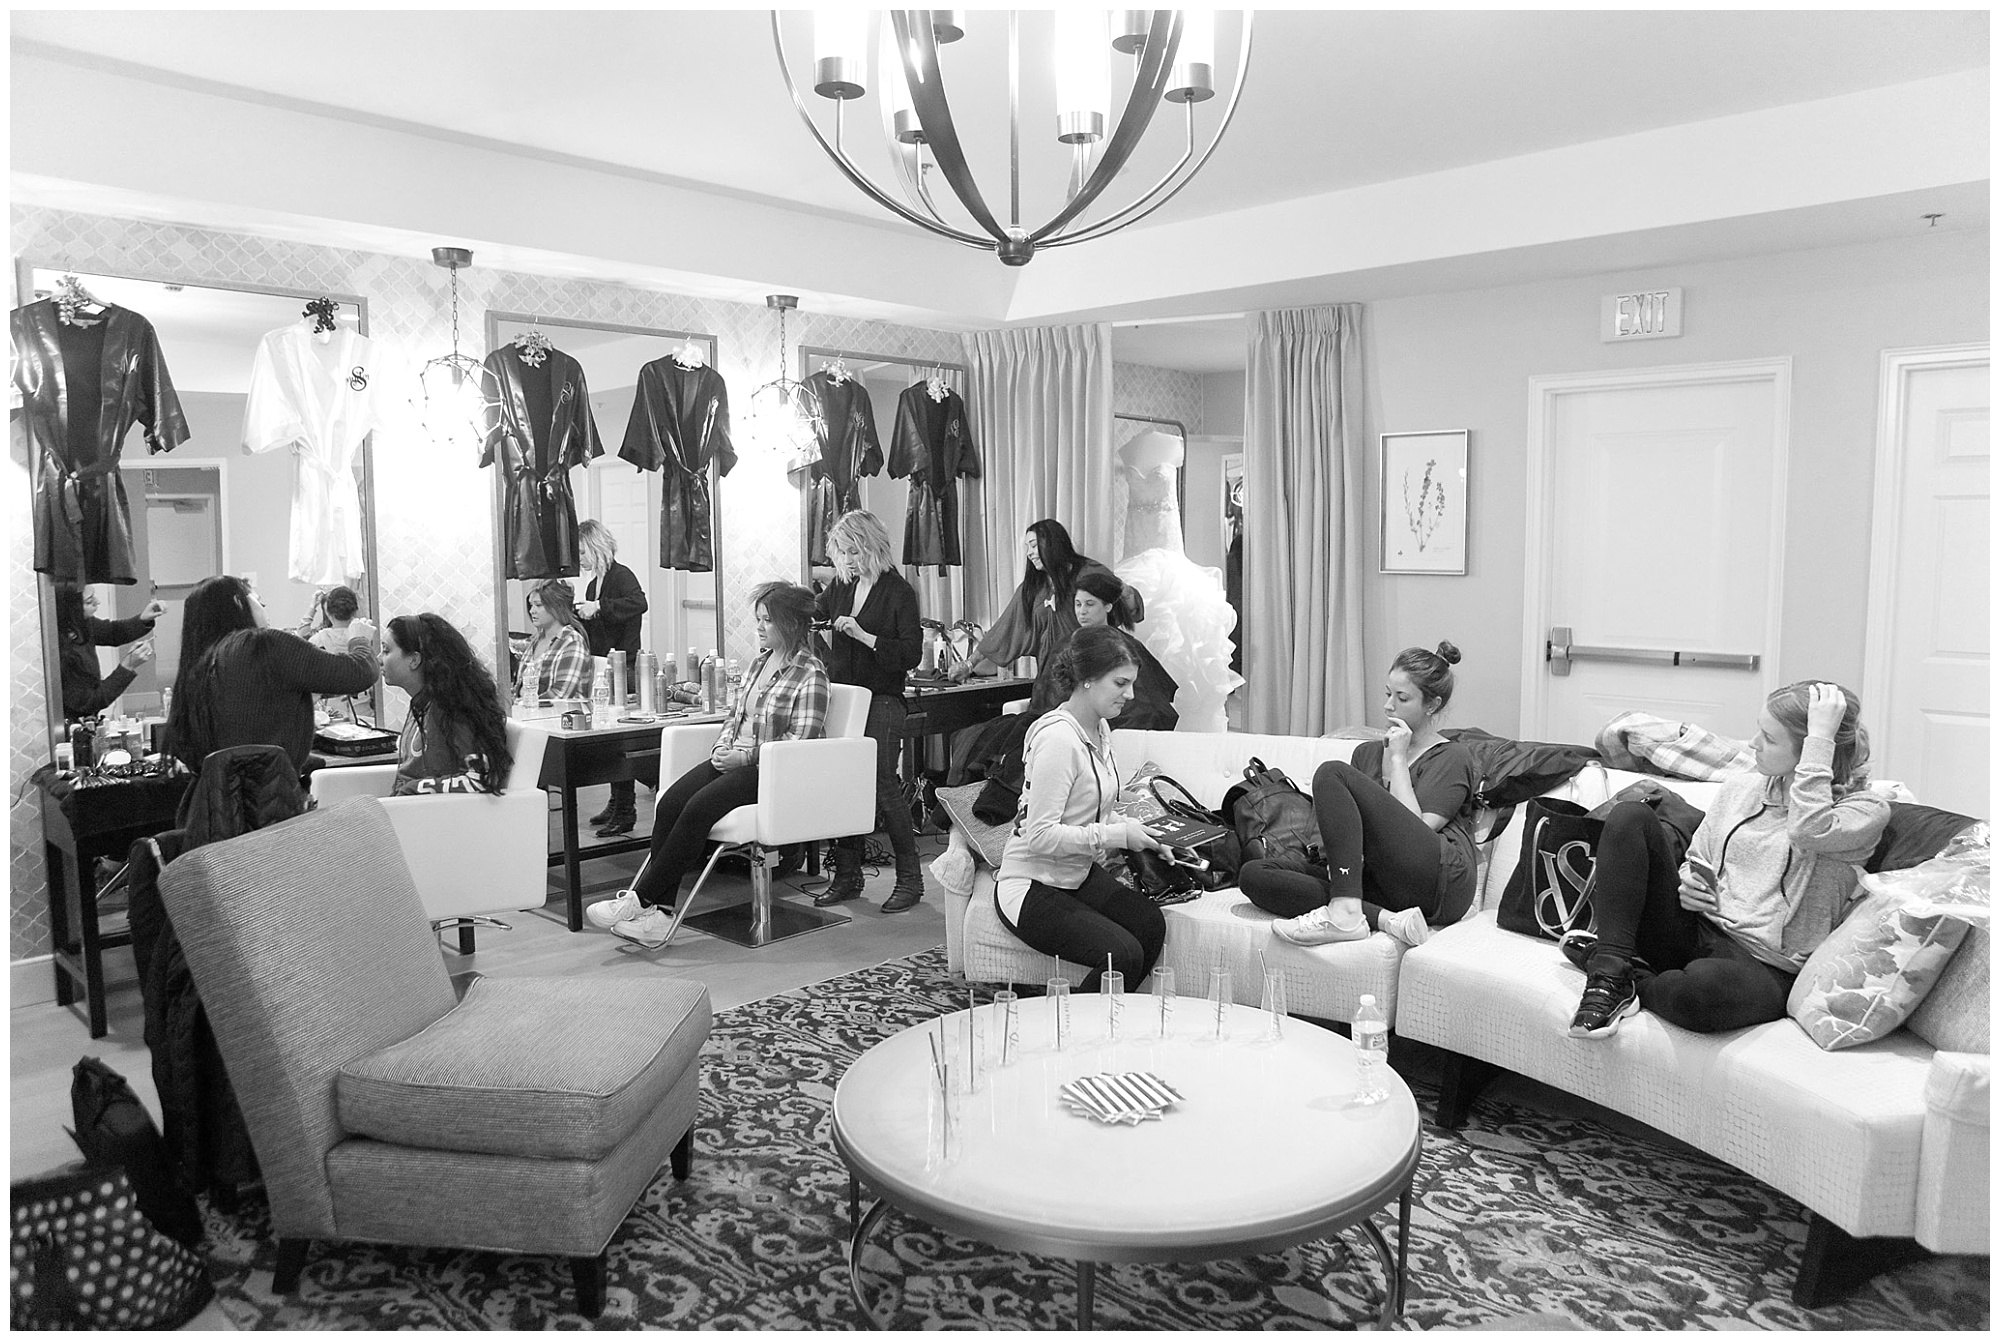 Photo of a bridal suite filled with a bridal part getting ready.